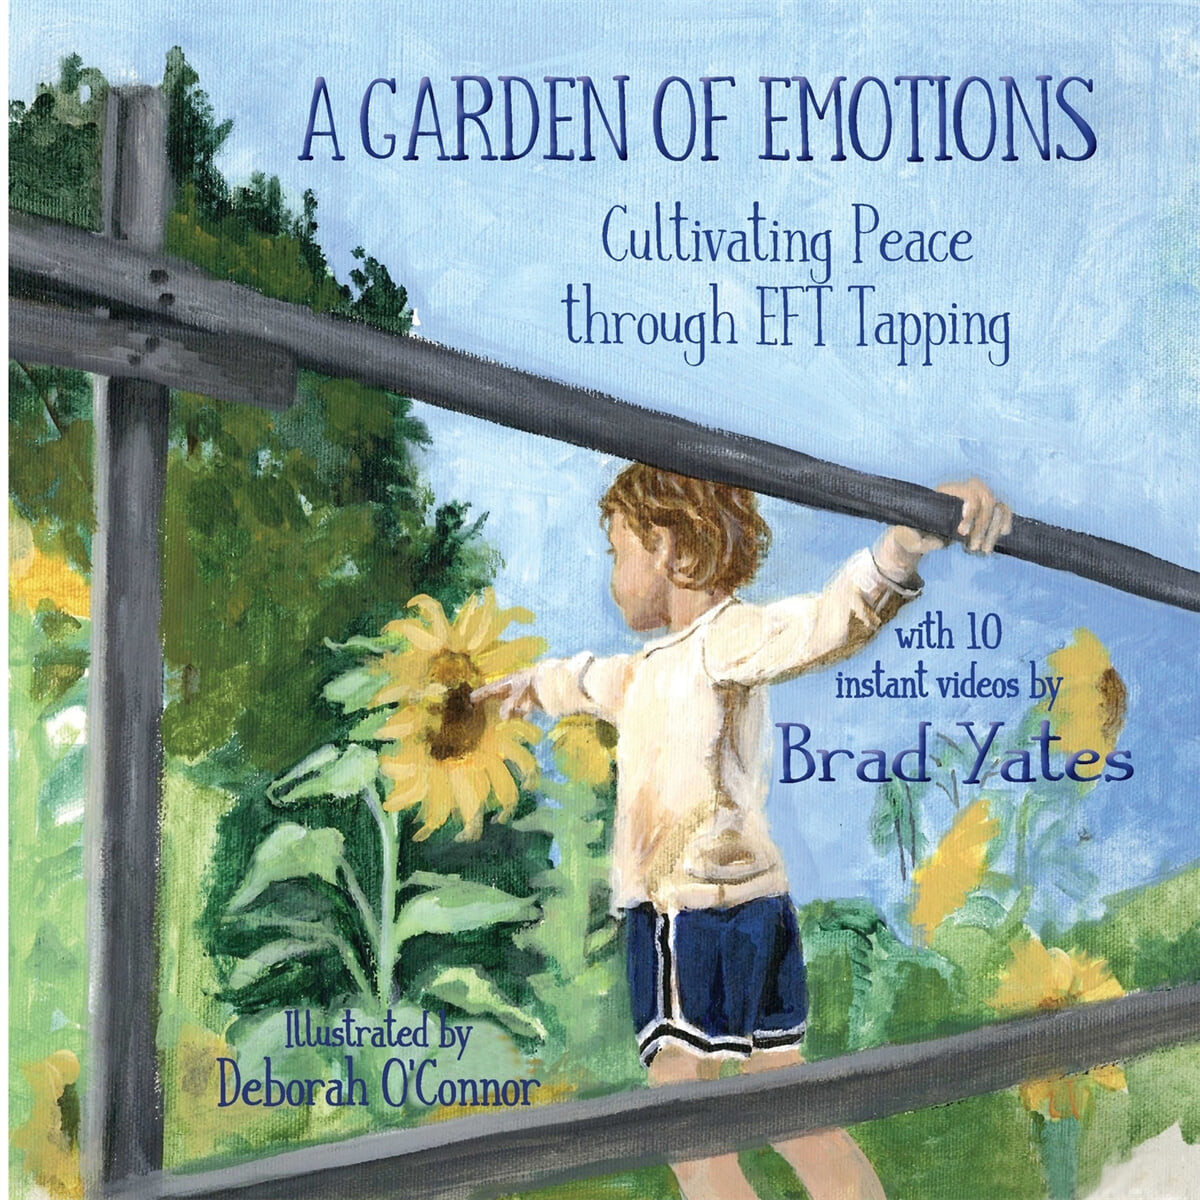 A Garden of Emotions (Cultivating Peace through EFT Tapping)